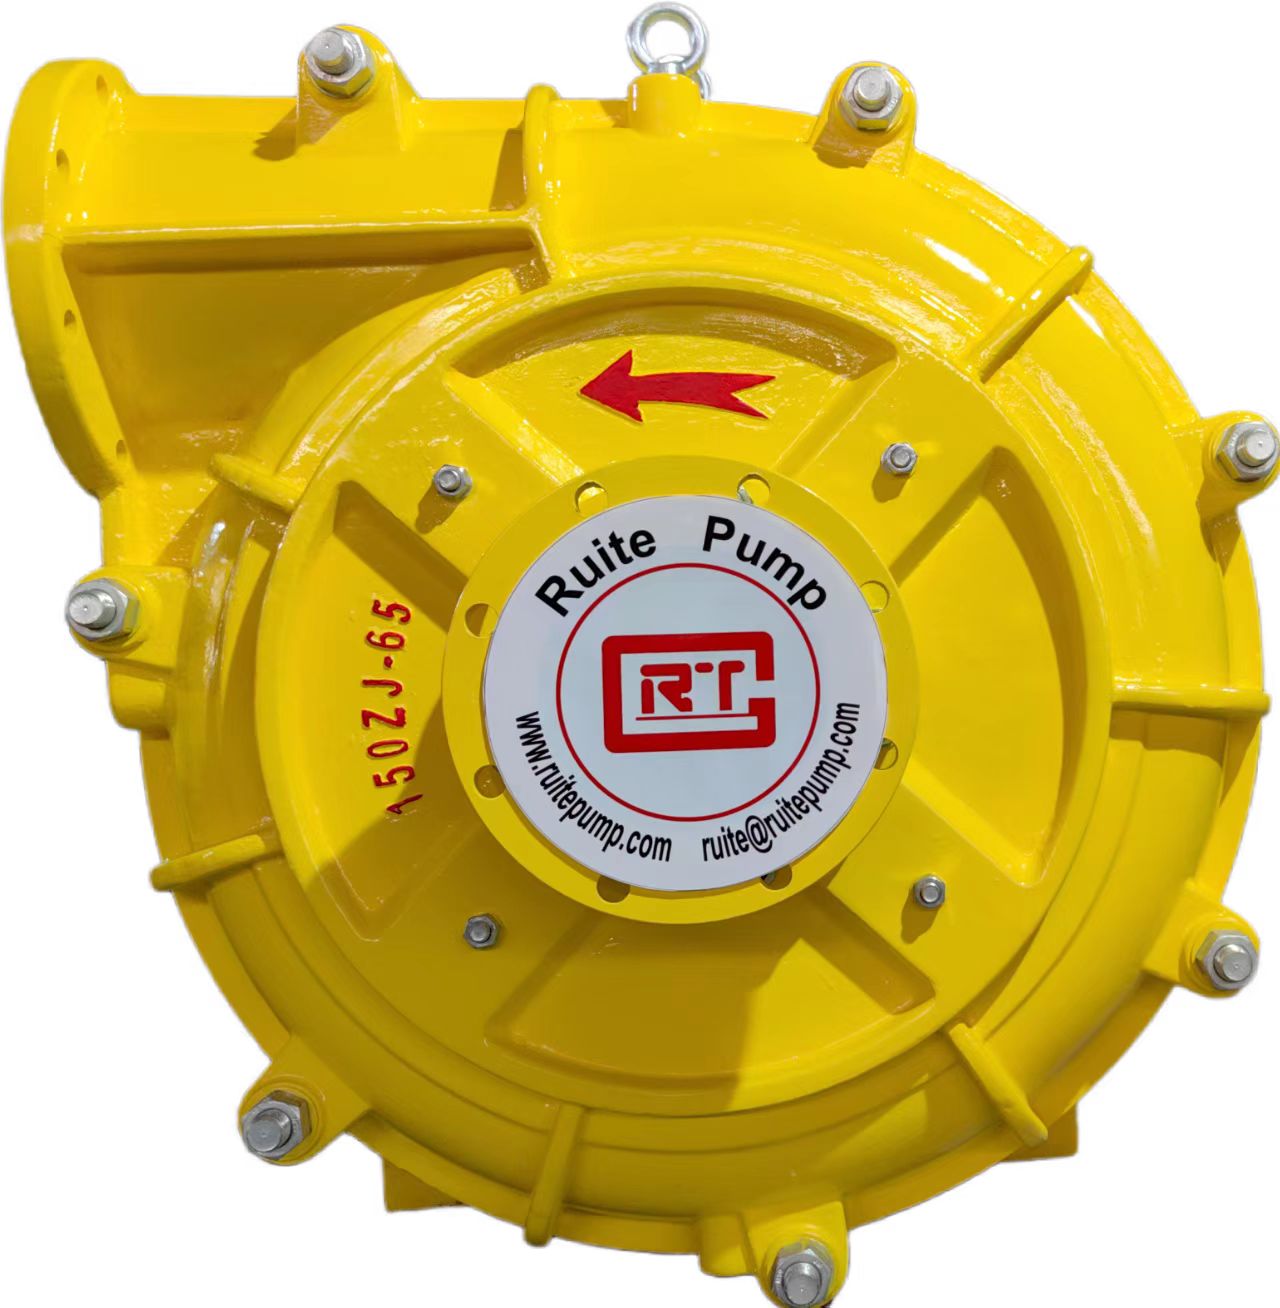 150ZJ-A65 slurry pump with flange Featured Image